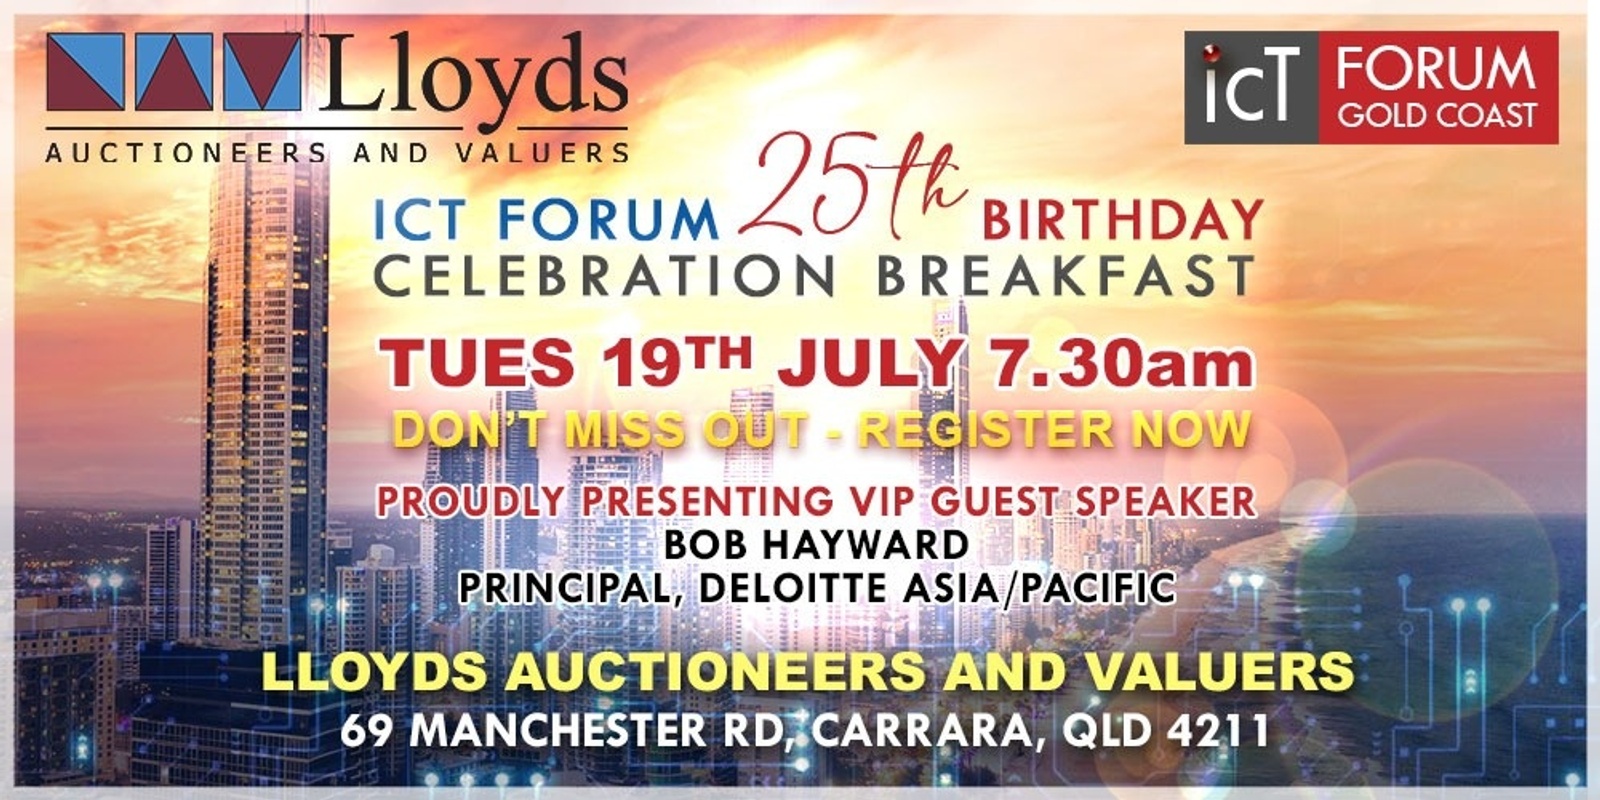 Banner image for ICT Forum Birthday Celebration Breakfast.  Join us to celebrate the Gold Coast ICT Forum's 25th Birthday.